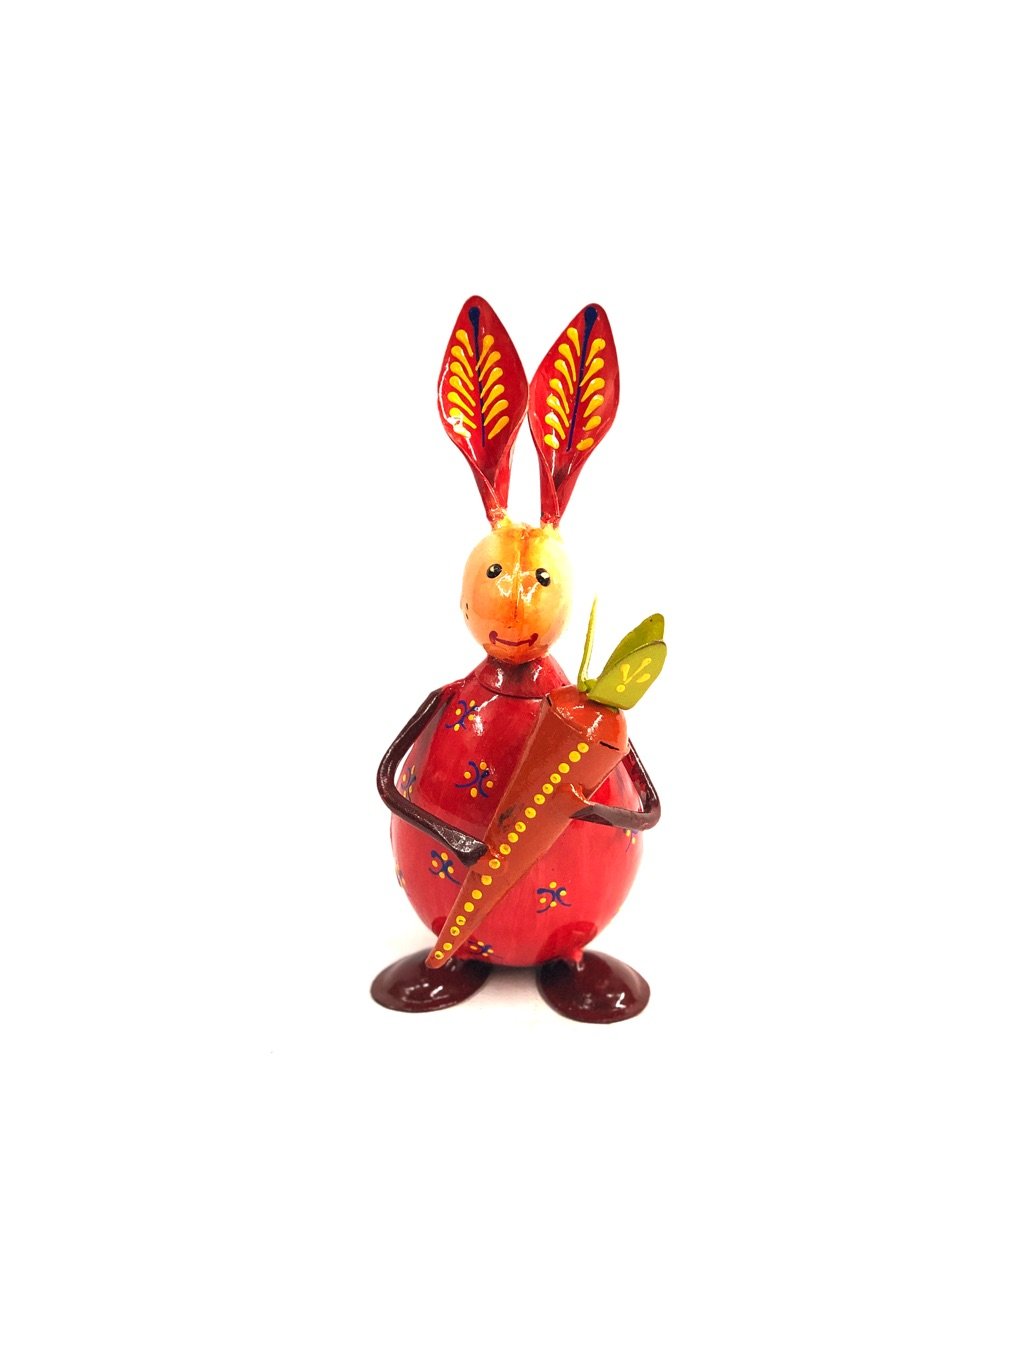 Cute Bunny Carrying Various Objects Exquisite Kids Showpiece By Tamrapatra